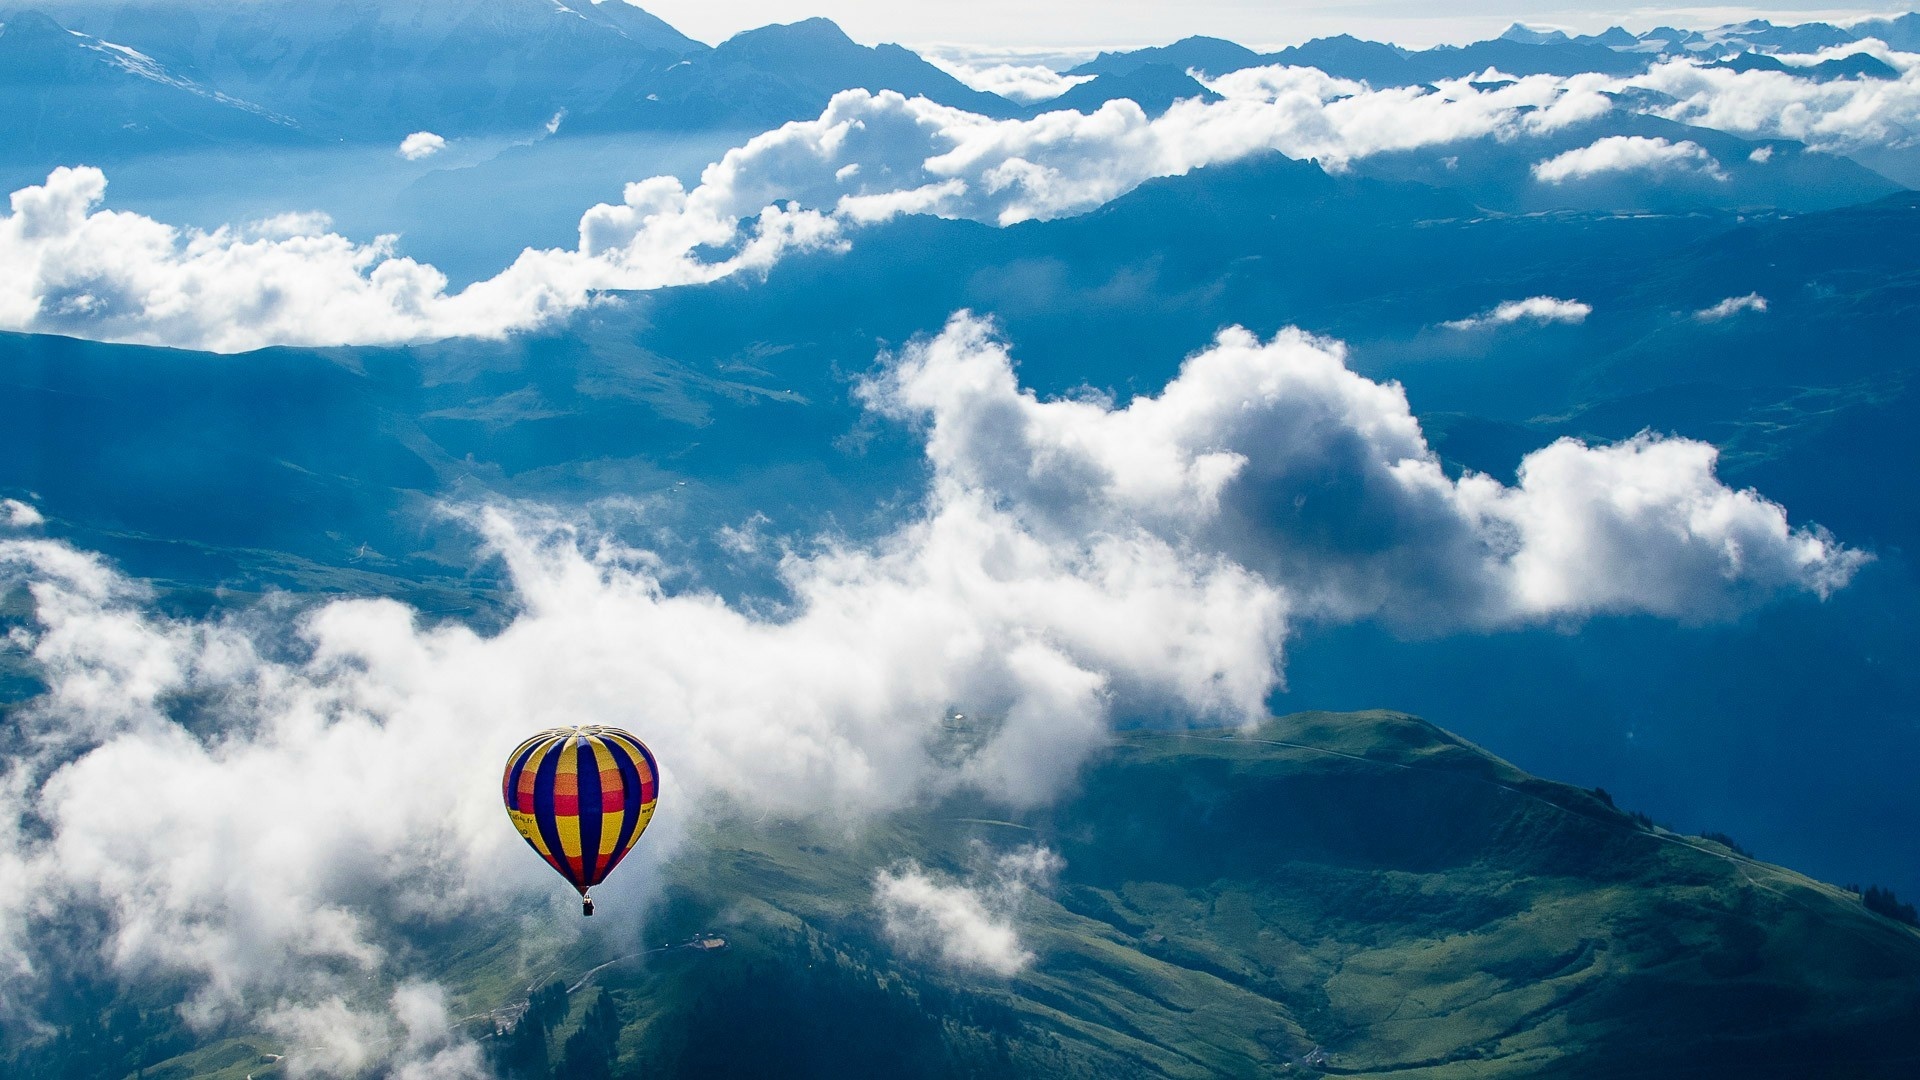 Air Sports: The Alps, High-altitude floating vehicle in Earth's upper atmosphere, Hot air balloon's aerostat. 1920x1080 Full HD Wallpaper.